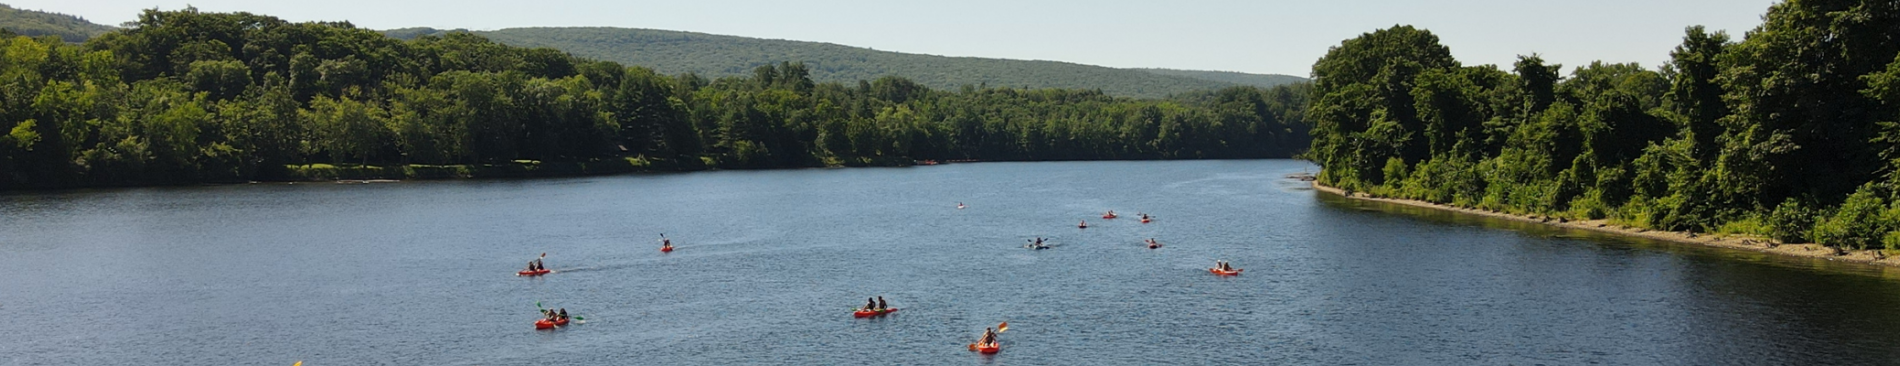 Kayaking along the Connecticut River